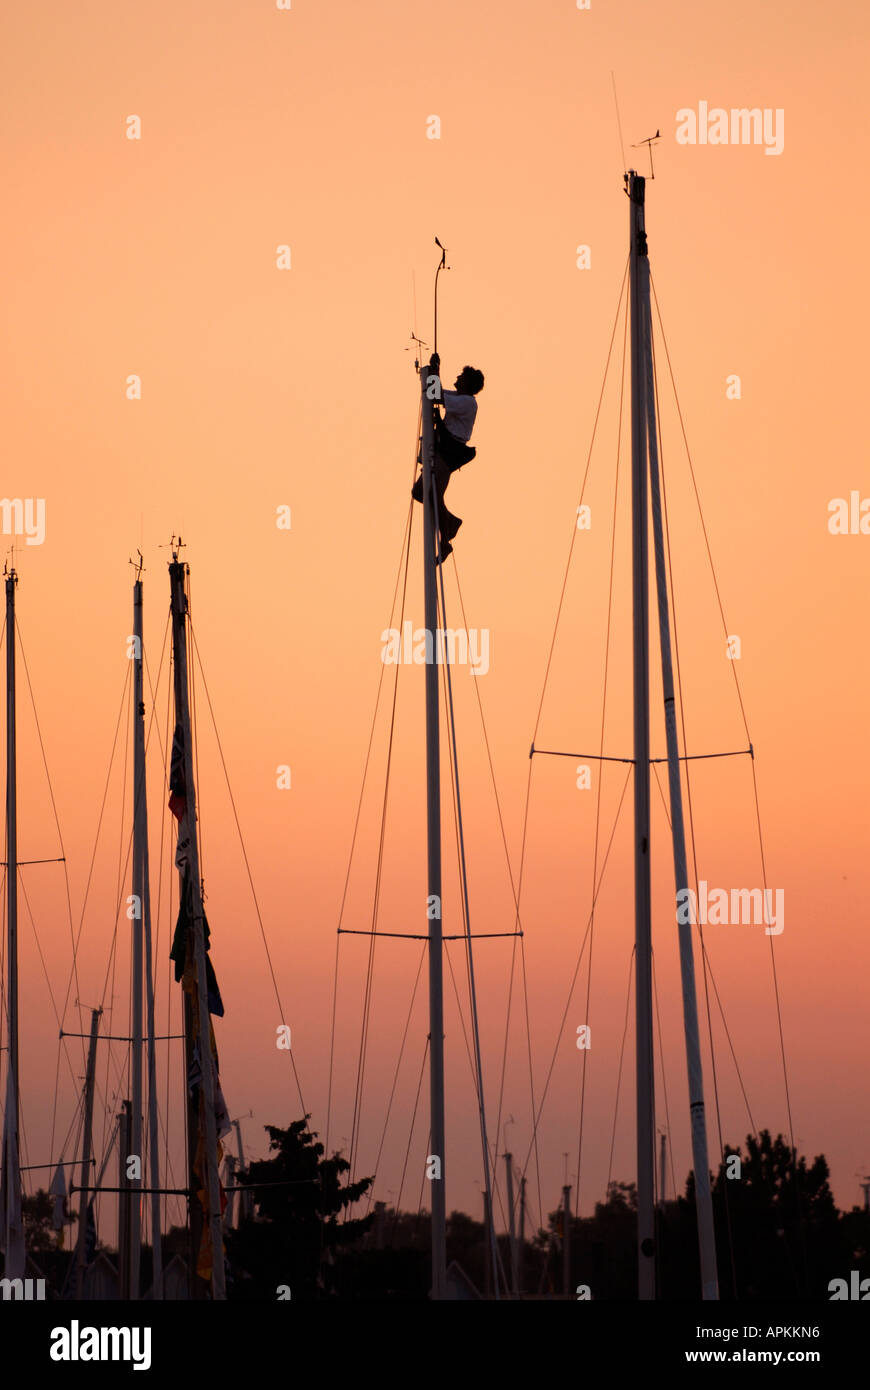 Male is silhouetted against the sky while climbing and working on a sailboat mast Stock Photo